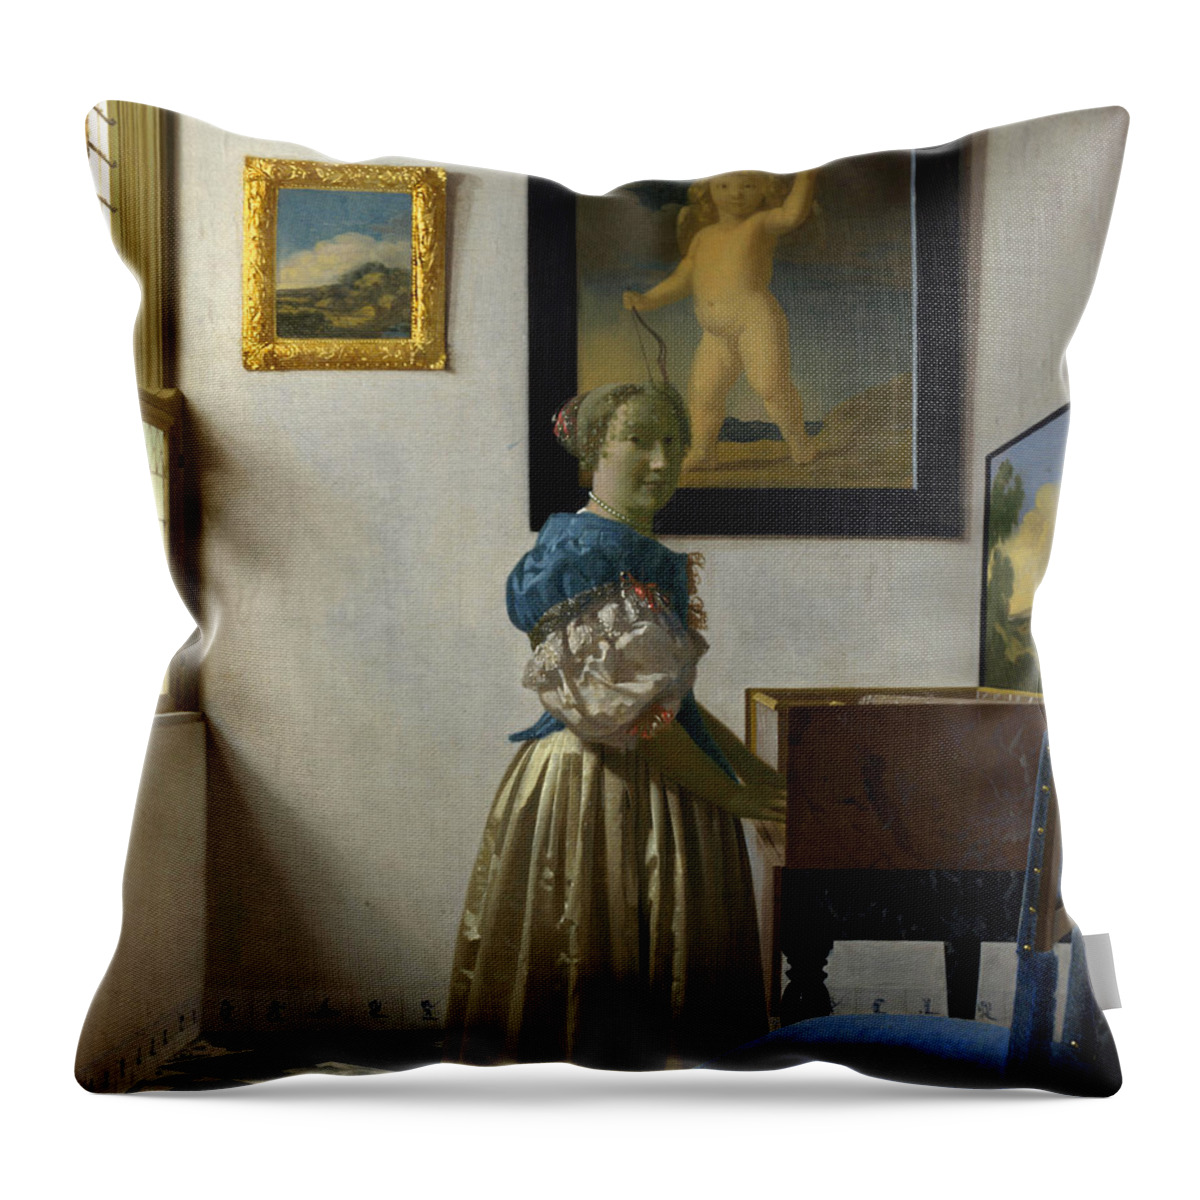 Johannes Vermeer Throw Pillow featuring the painting Lady Standing At A Virginal by Johannes Vermeer